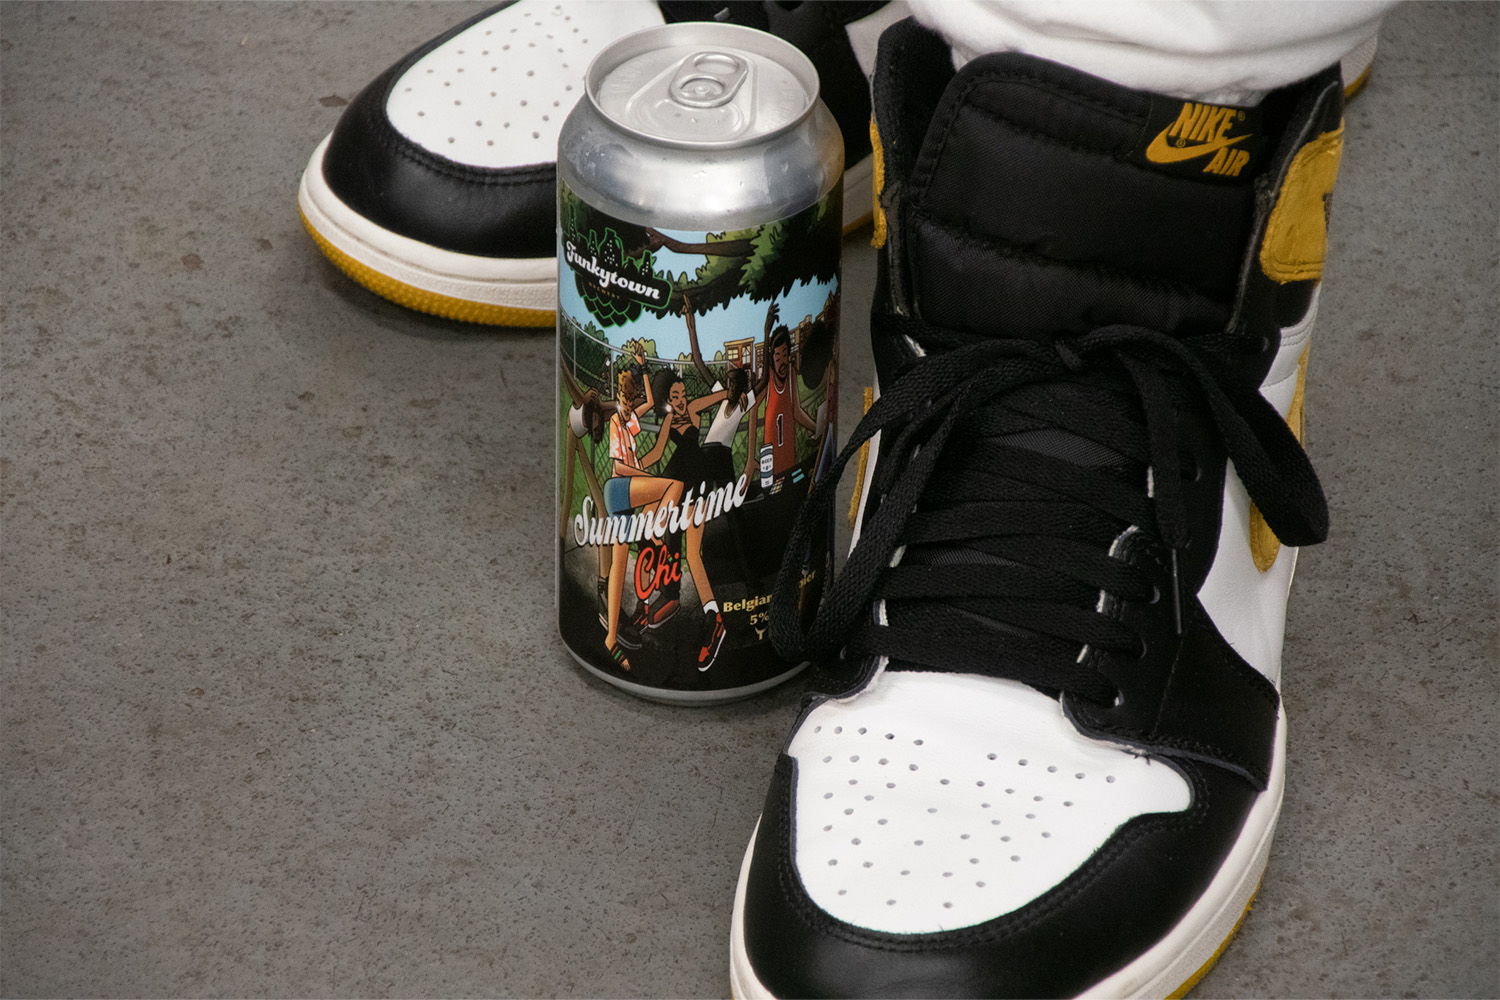 Summertime Chi, the newest beer from Funkytown Brewing in Chicago, in a can in between Nike sneakers